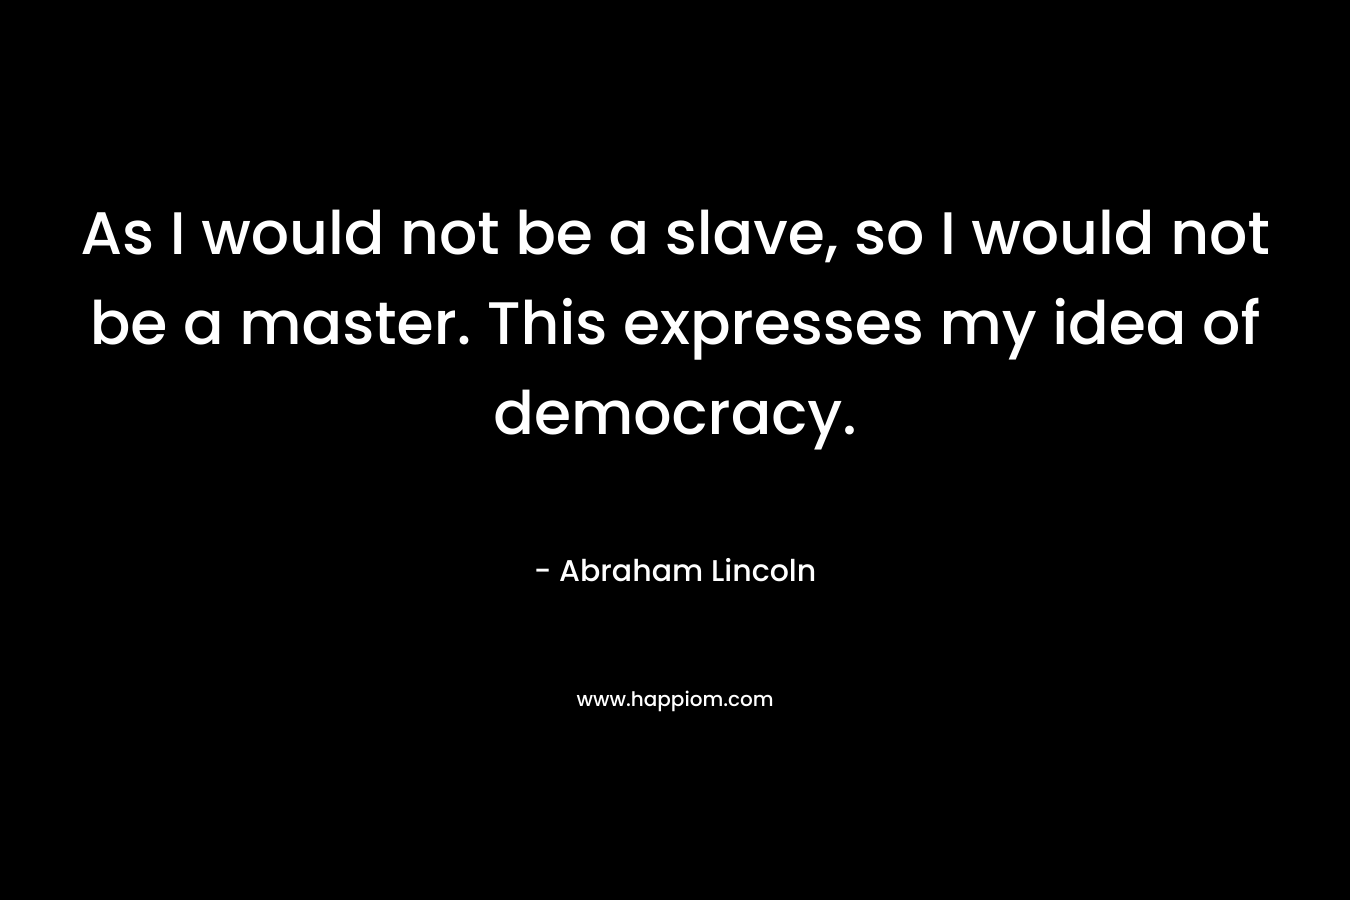 As I would not be a slave, so I would not be a master. This expresses my idea of democracy. – Abraham Lincoln